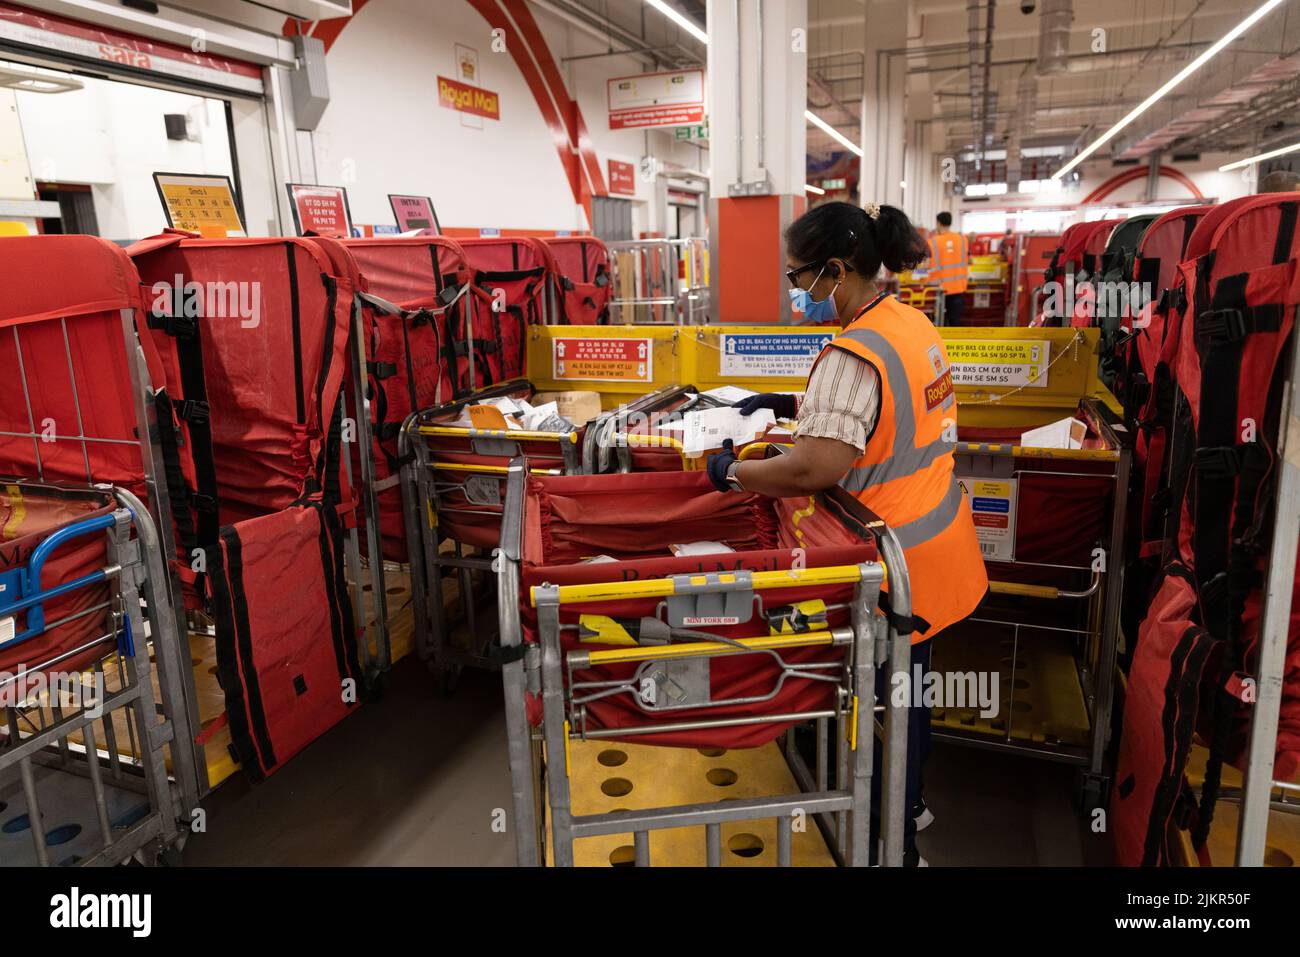 Royal Mail sorting office at Mount Pleasant, London, England, United Kingdom Stock Photo